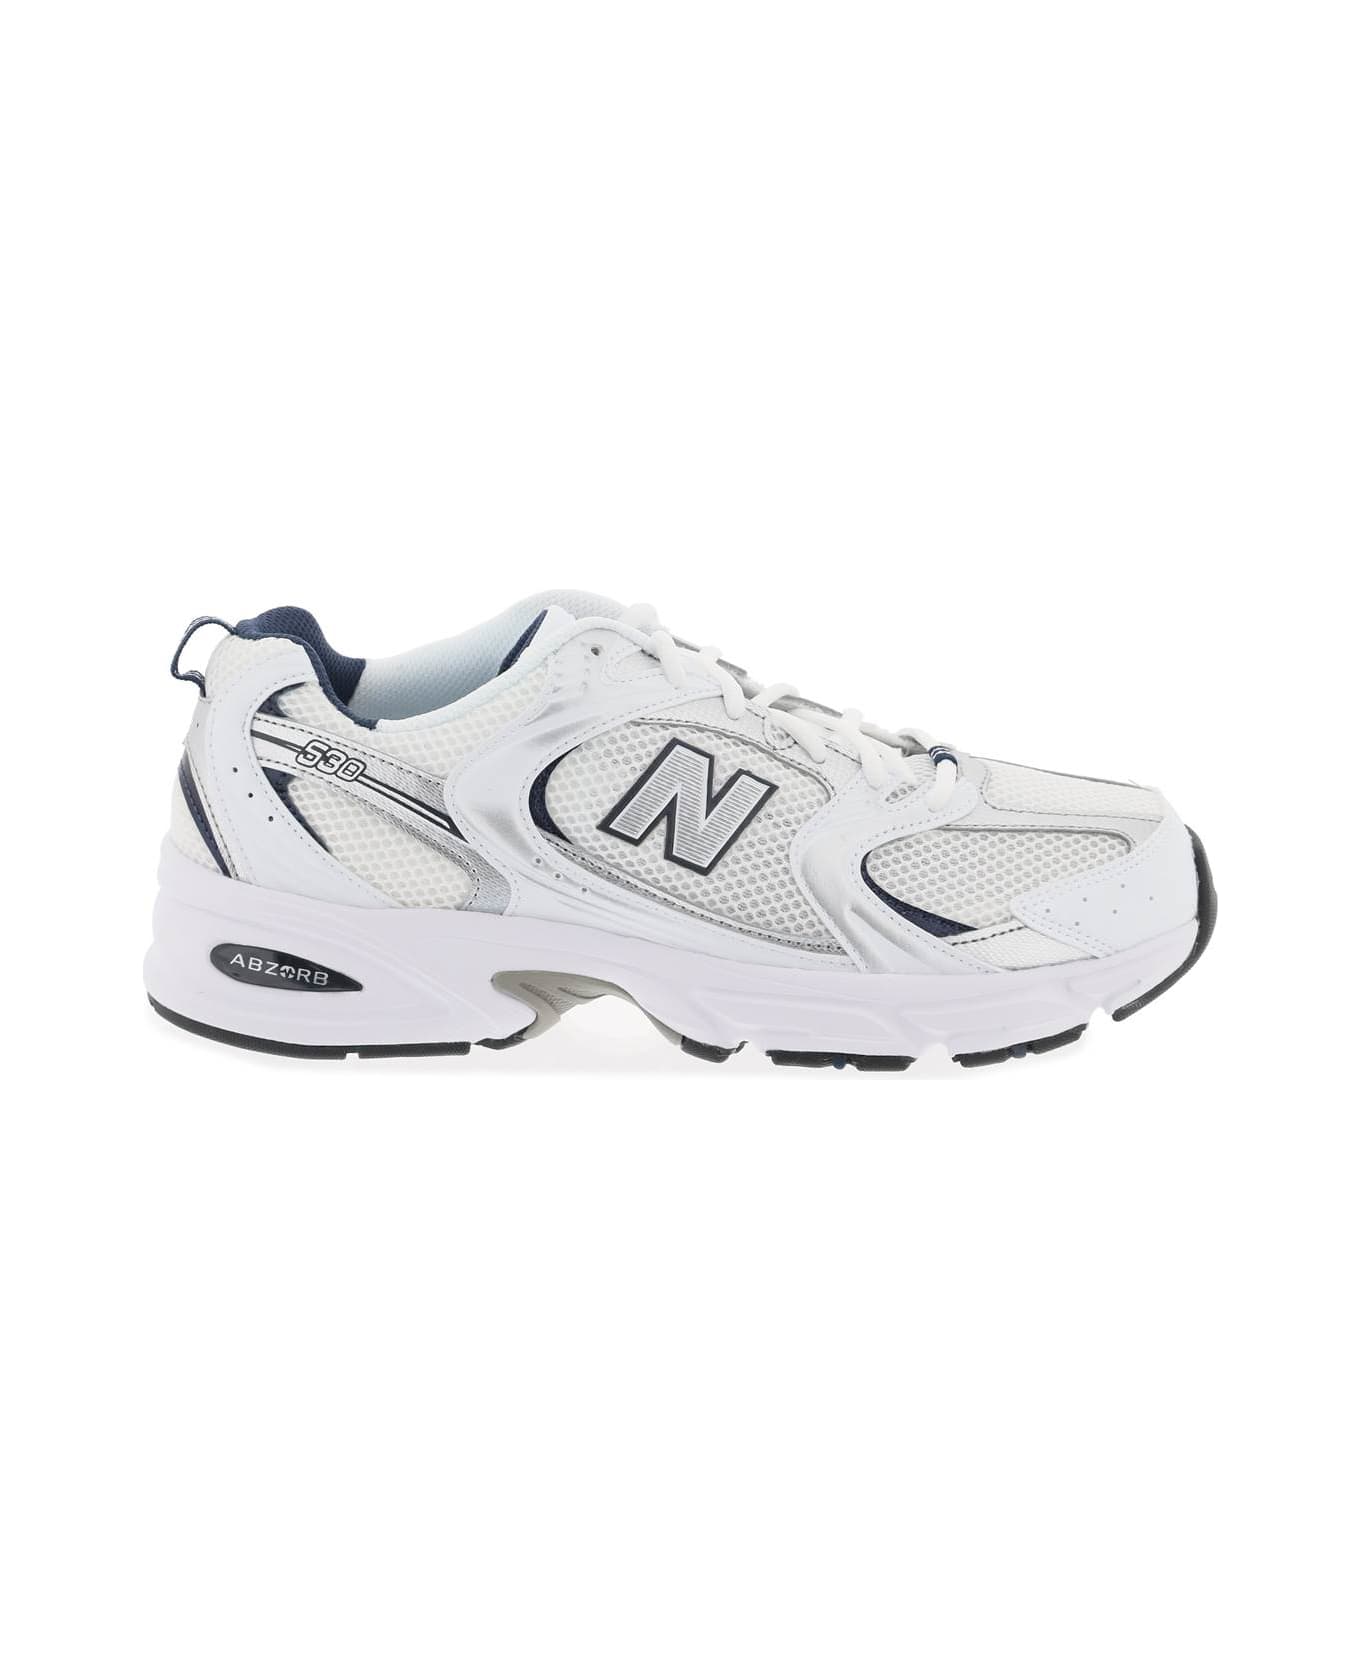 New Balance 530 Sneakers - WHITE BLUE D (White)